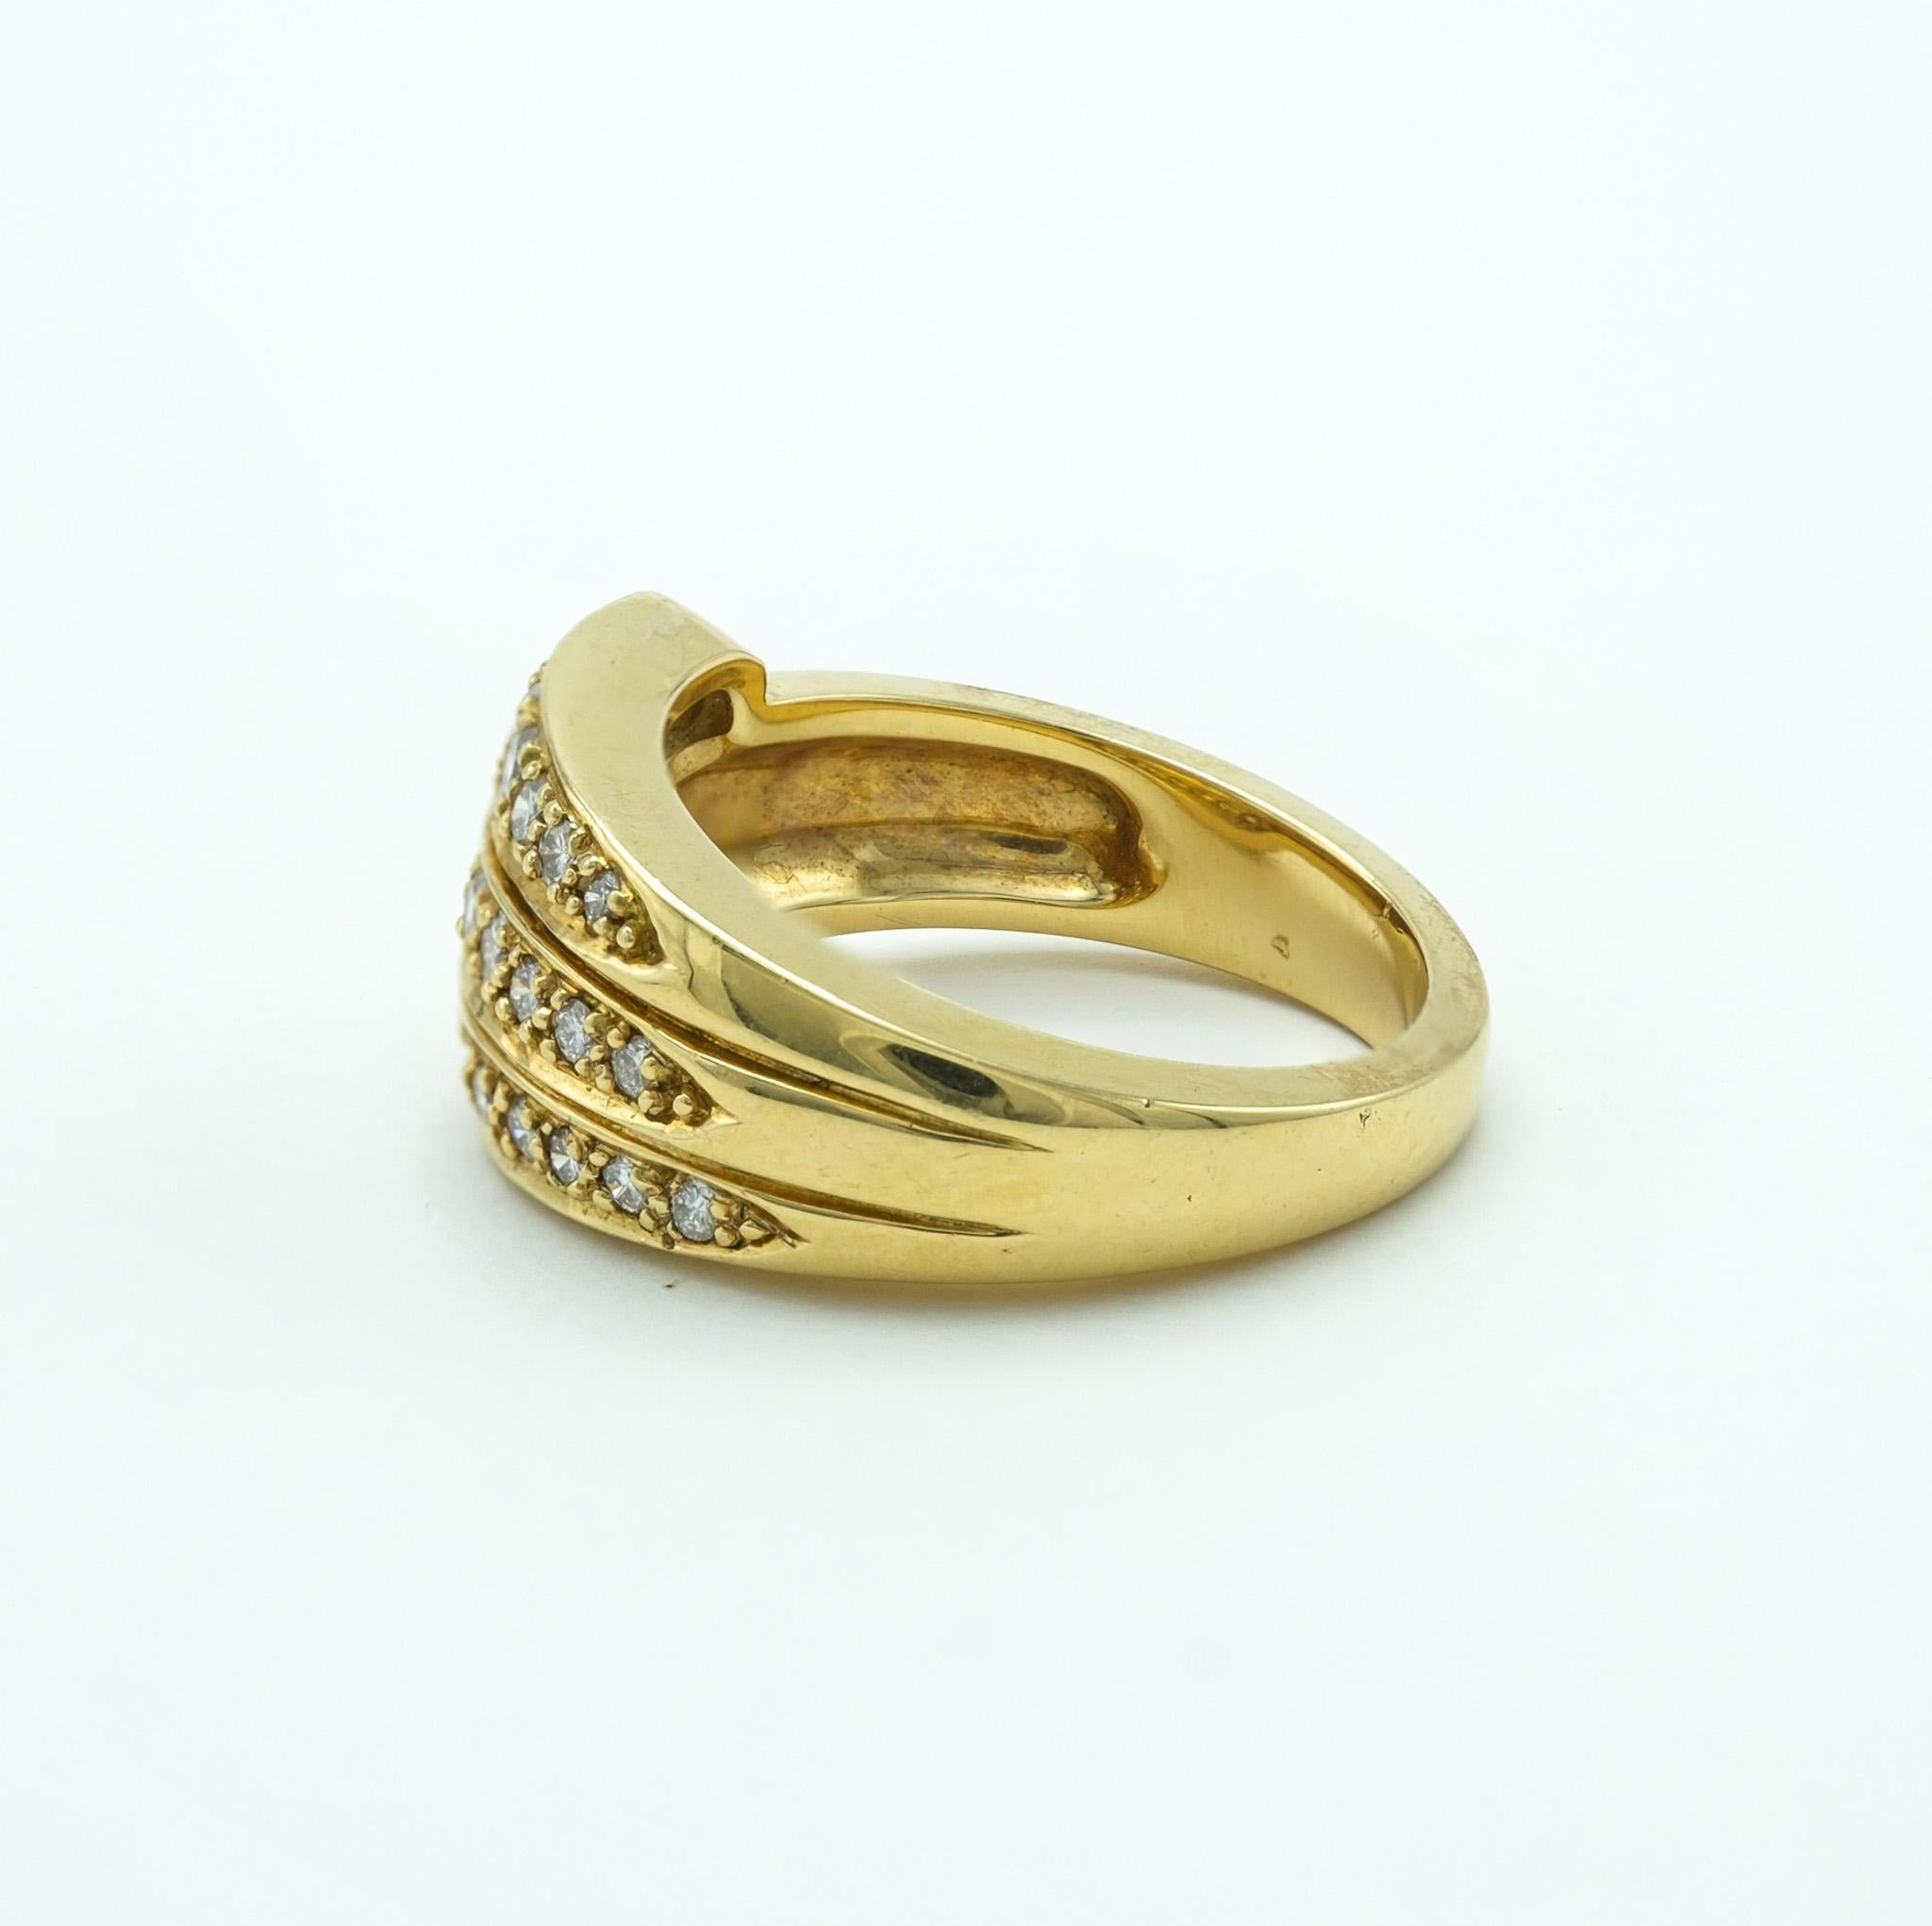 This 18 karat yellow gold band ring is a distinctive creation by the esteemed designer Jabel, known for their innovation and high quality designs.

Showcasing a modernist aesthetic, the ring features 3 rows, each adorned with 7 round G-H VS2-SI1